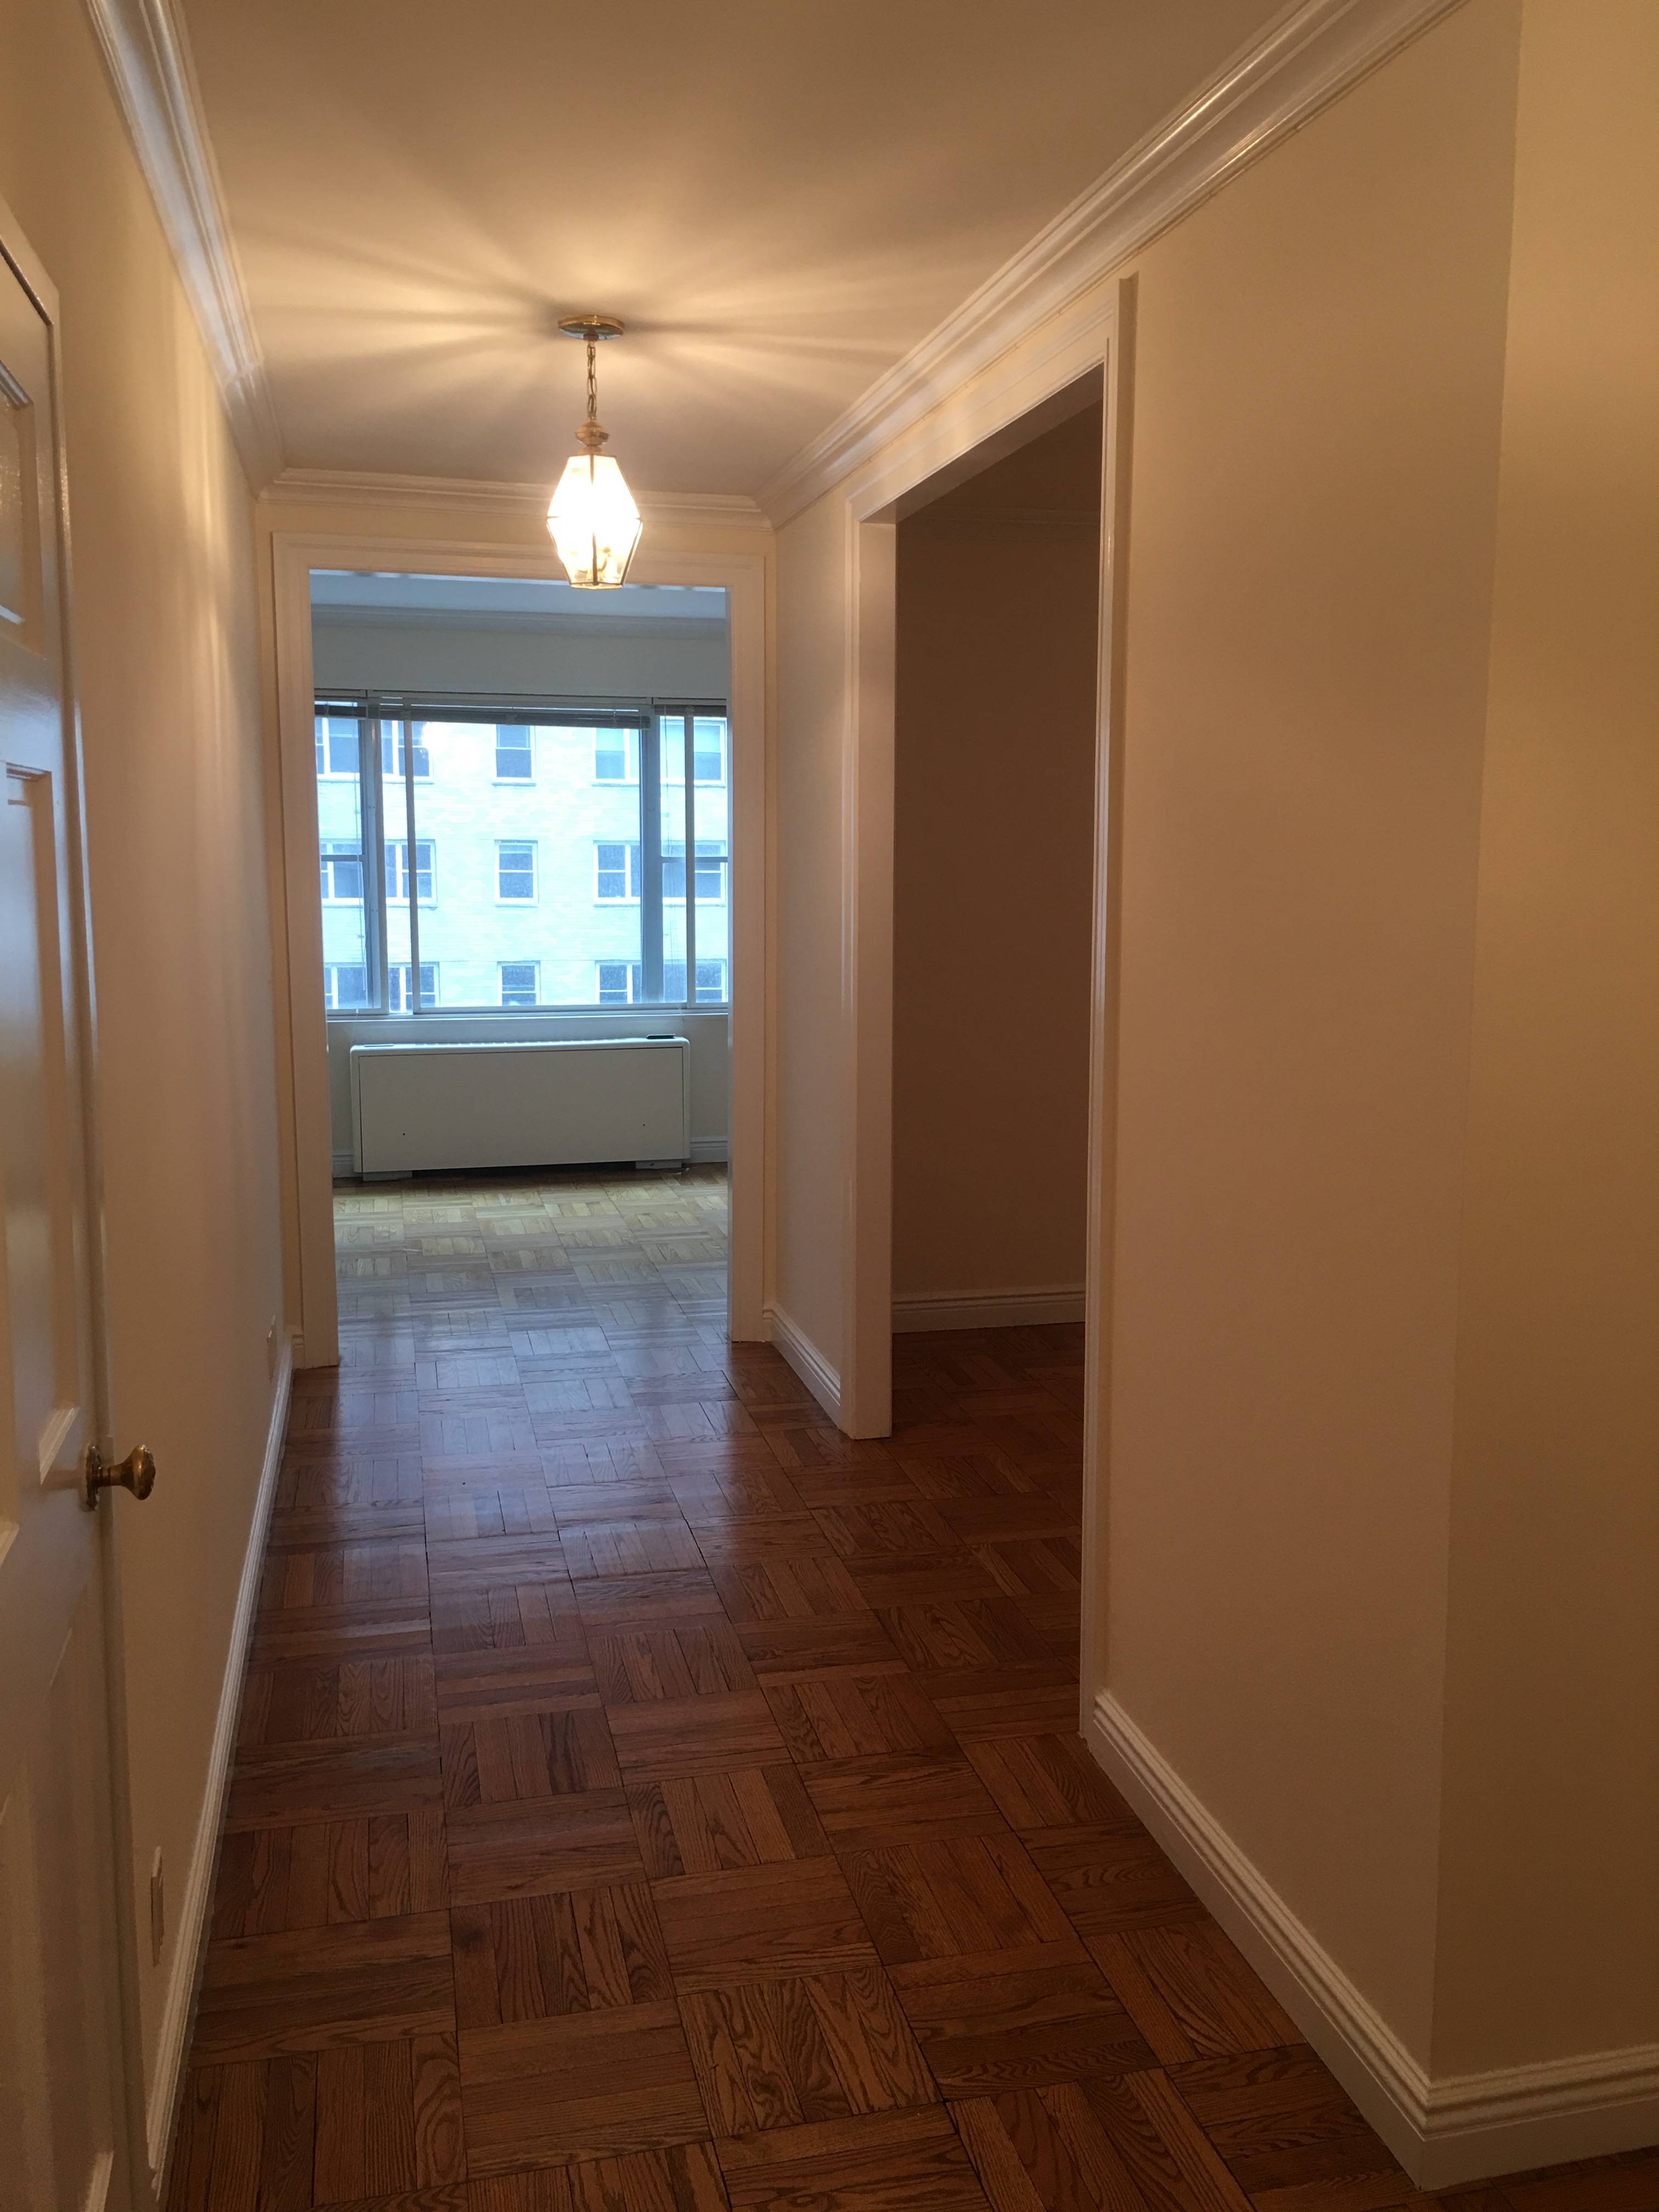 Unique Studio -Like a one bedroom $3100 - Best Midtown Location Steps to Central Park